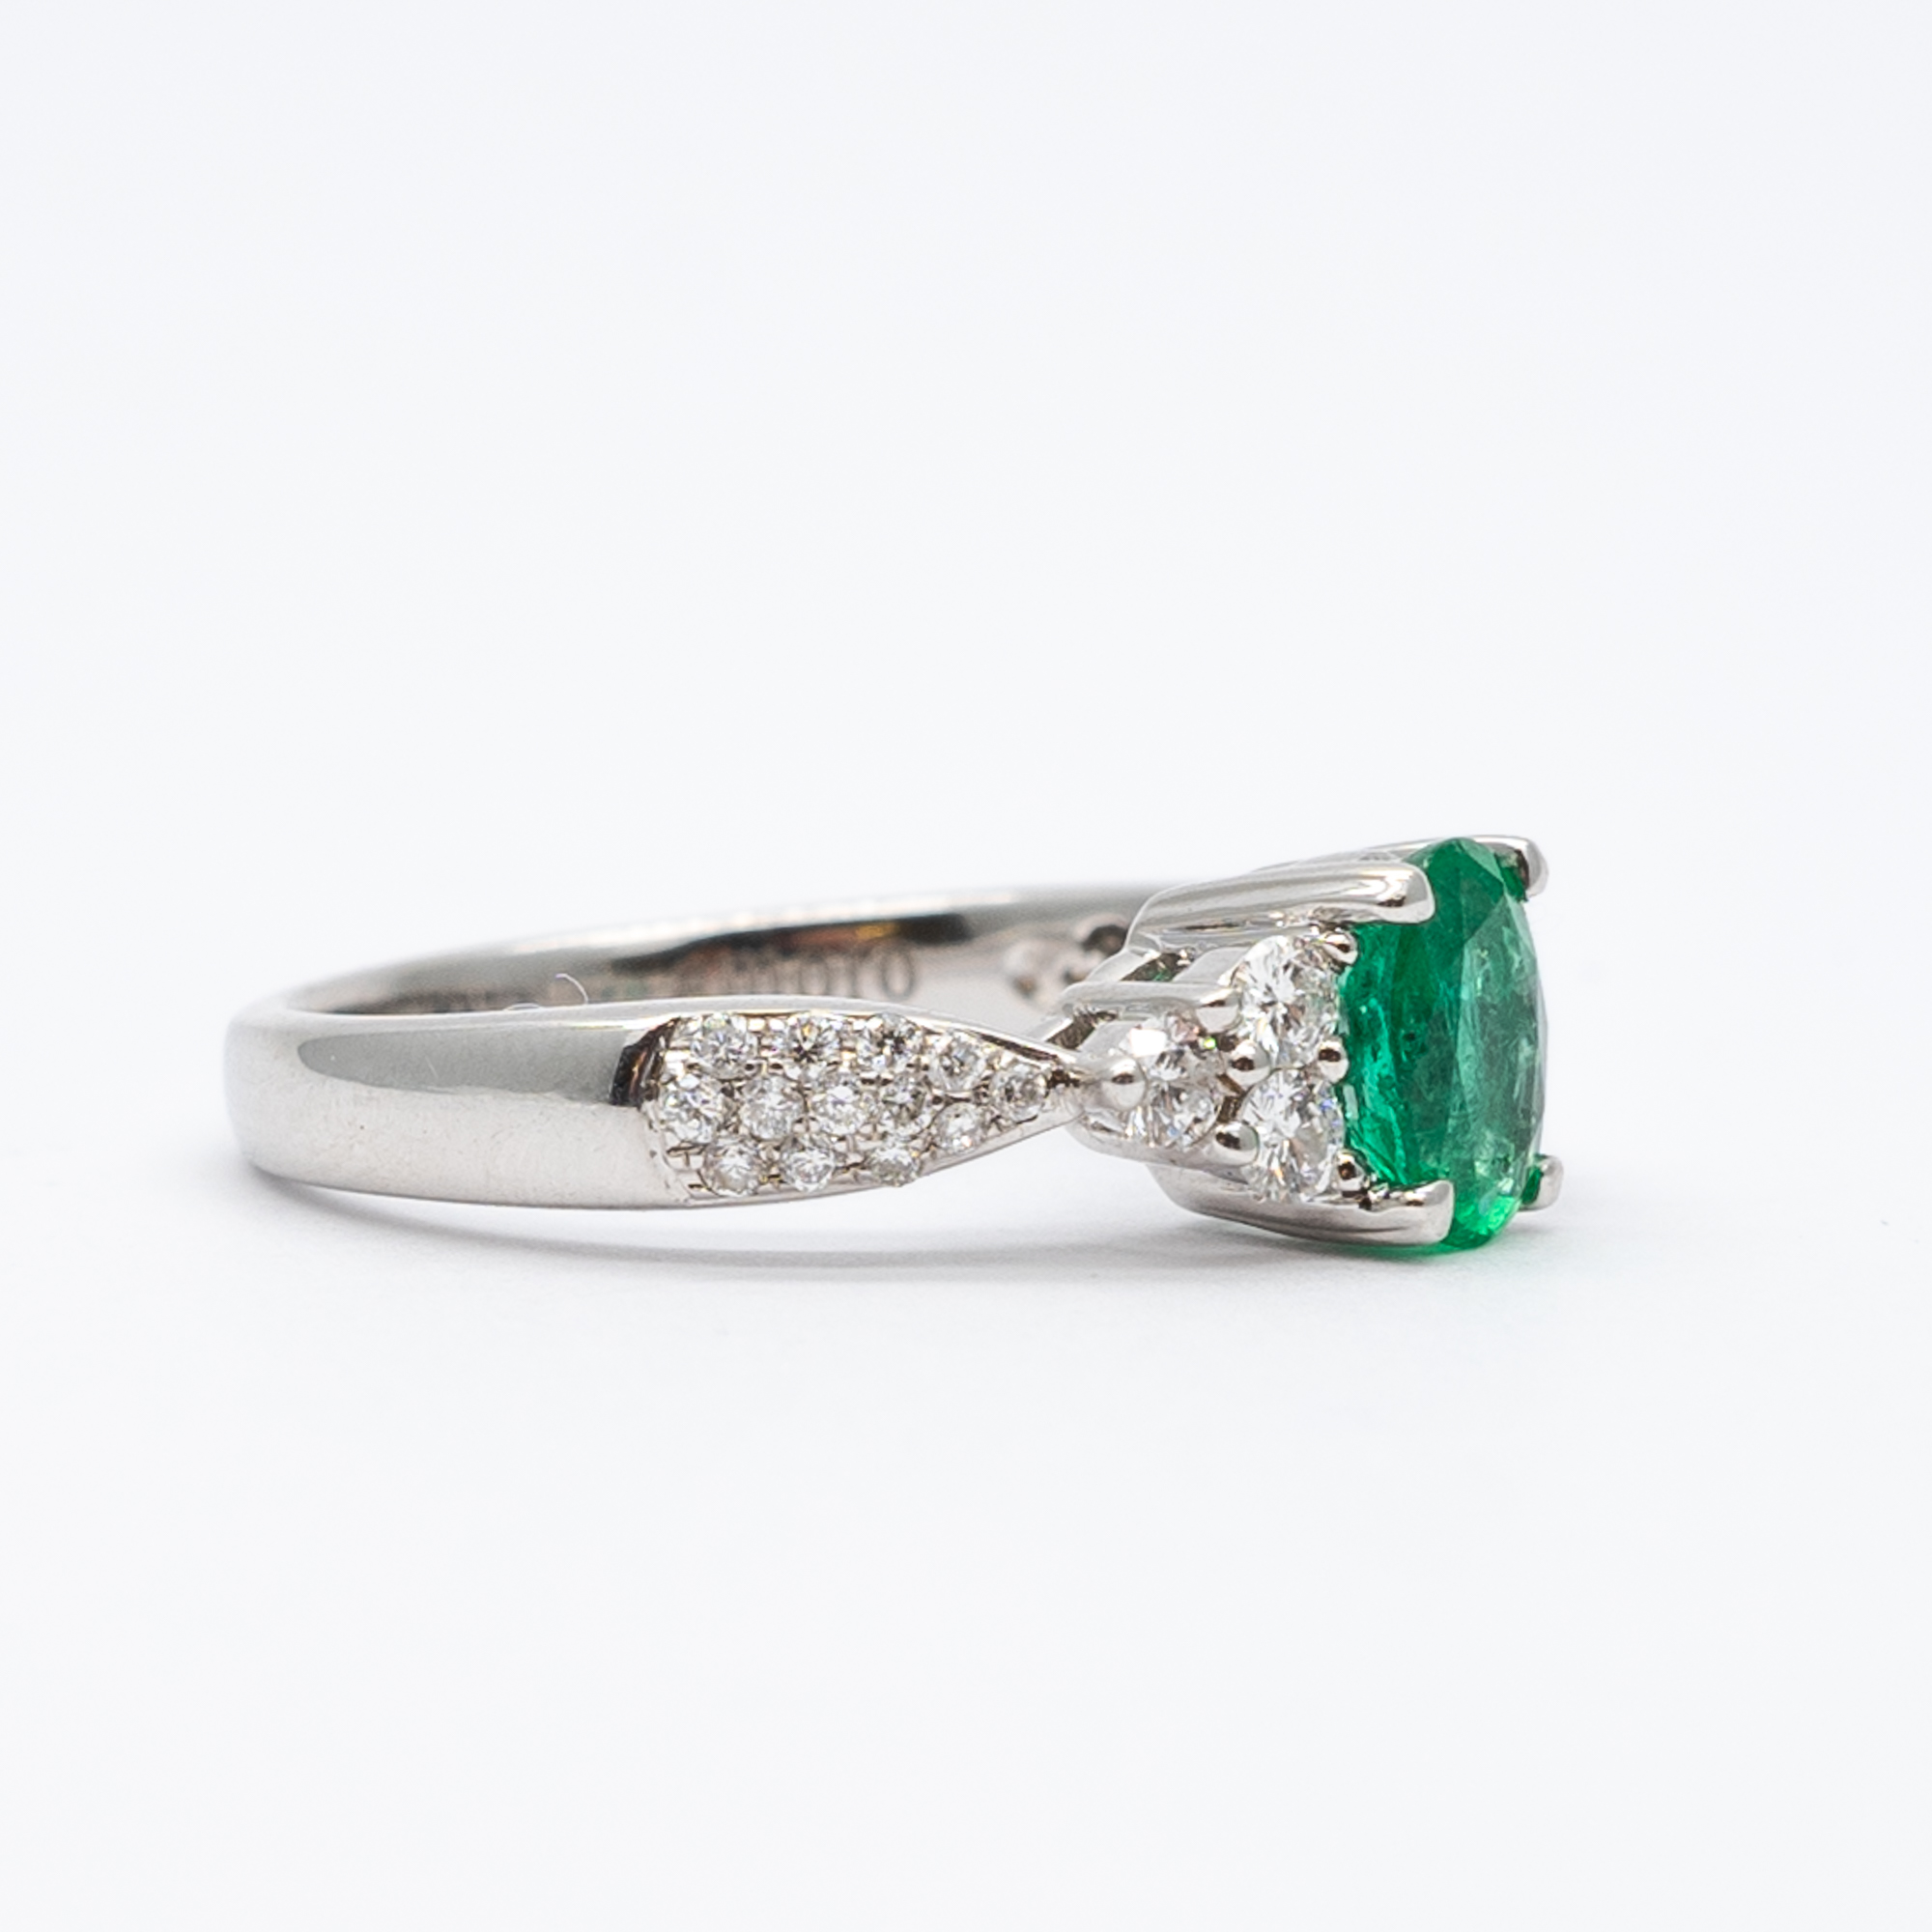 A 14ct white gold columbian emerald and diamond ring - Image 2 of 6